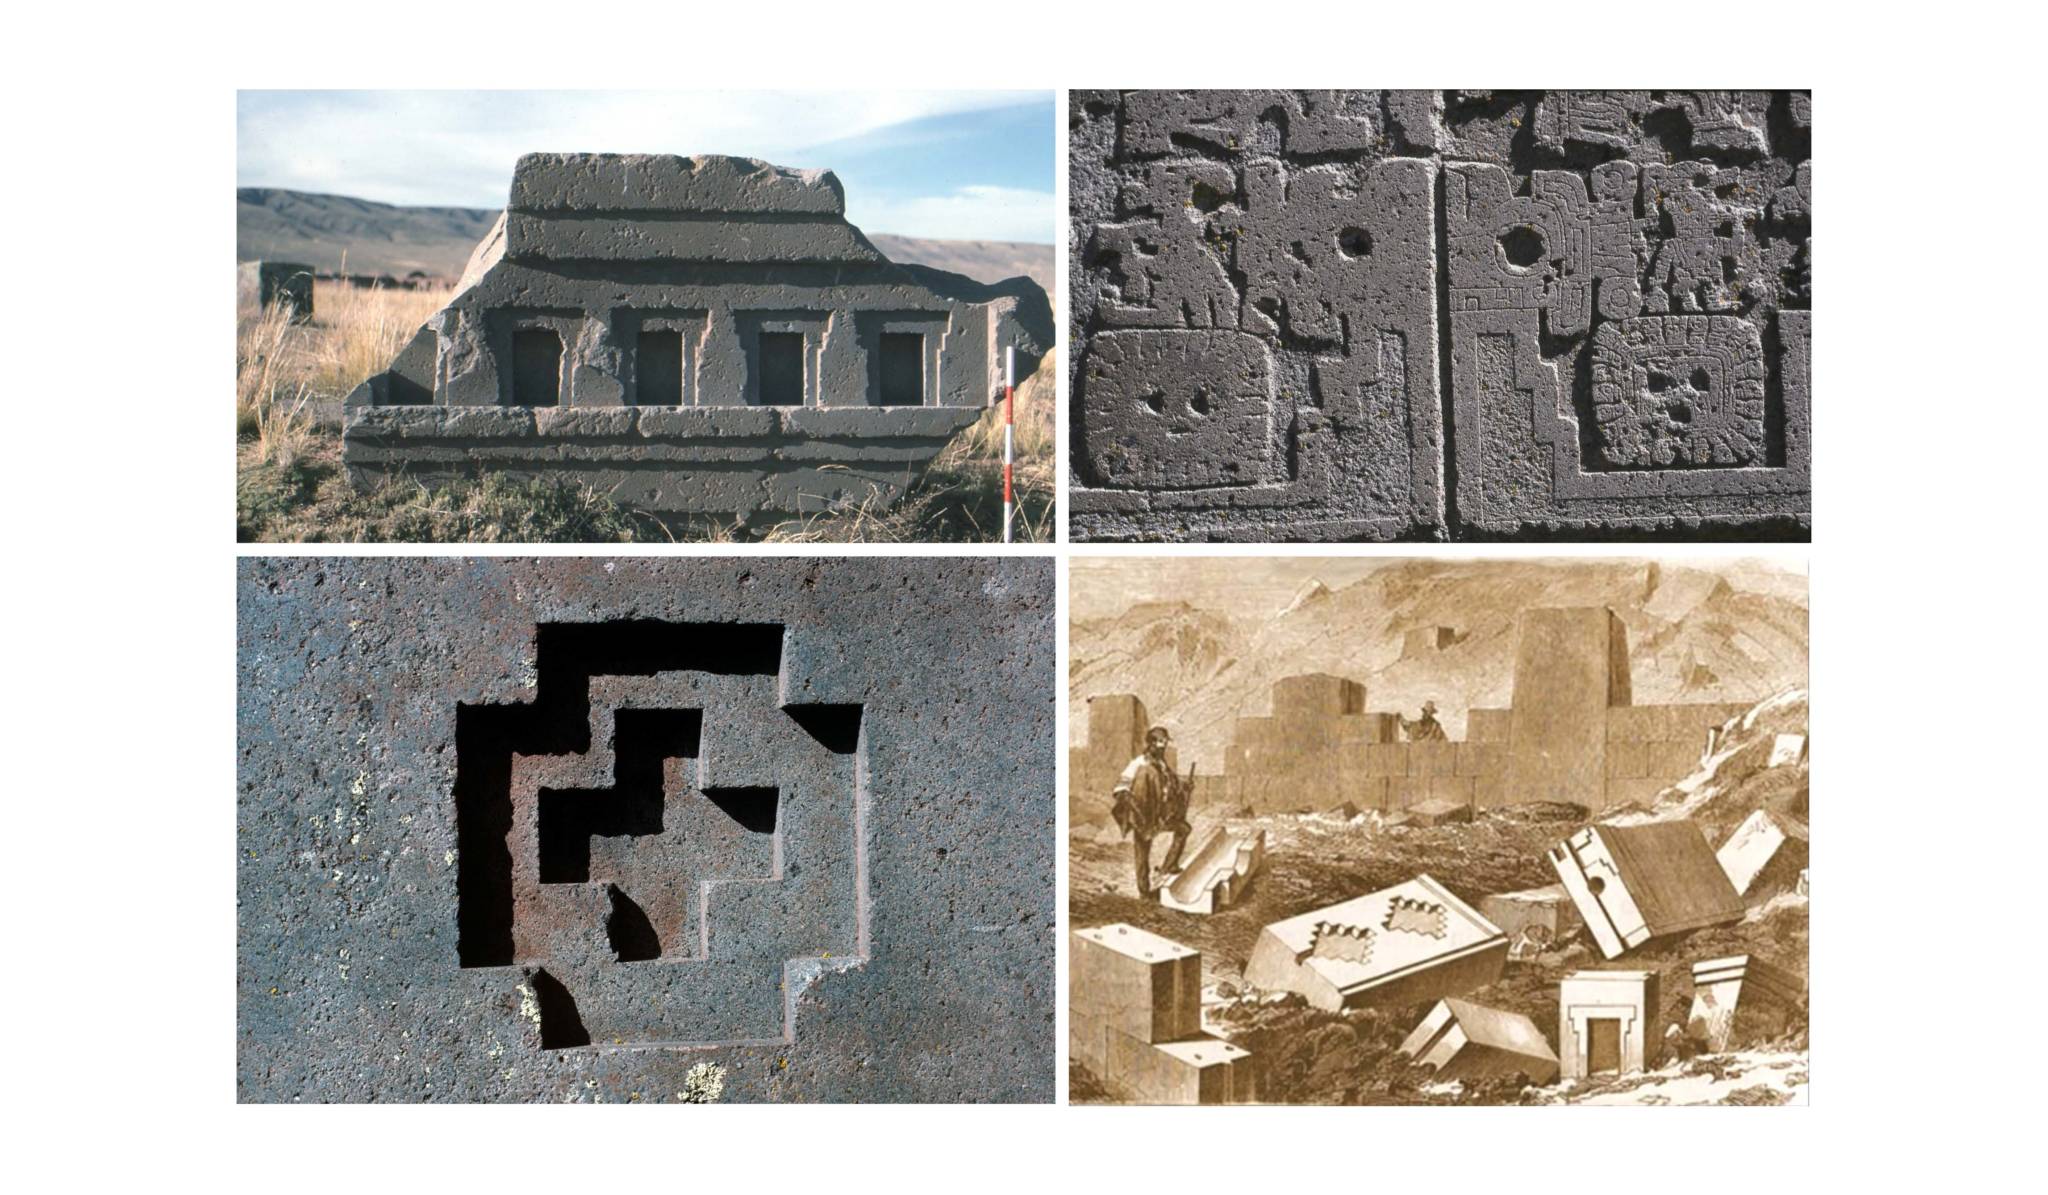 Image collage of structures in the Andean desert